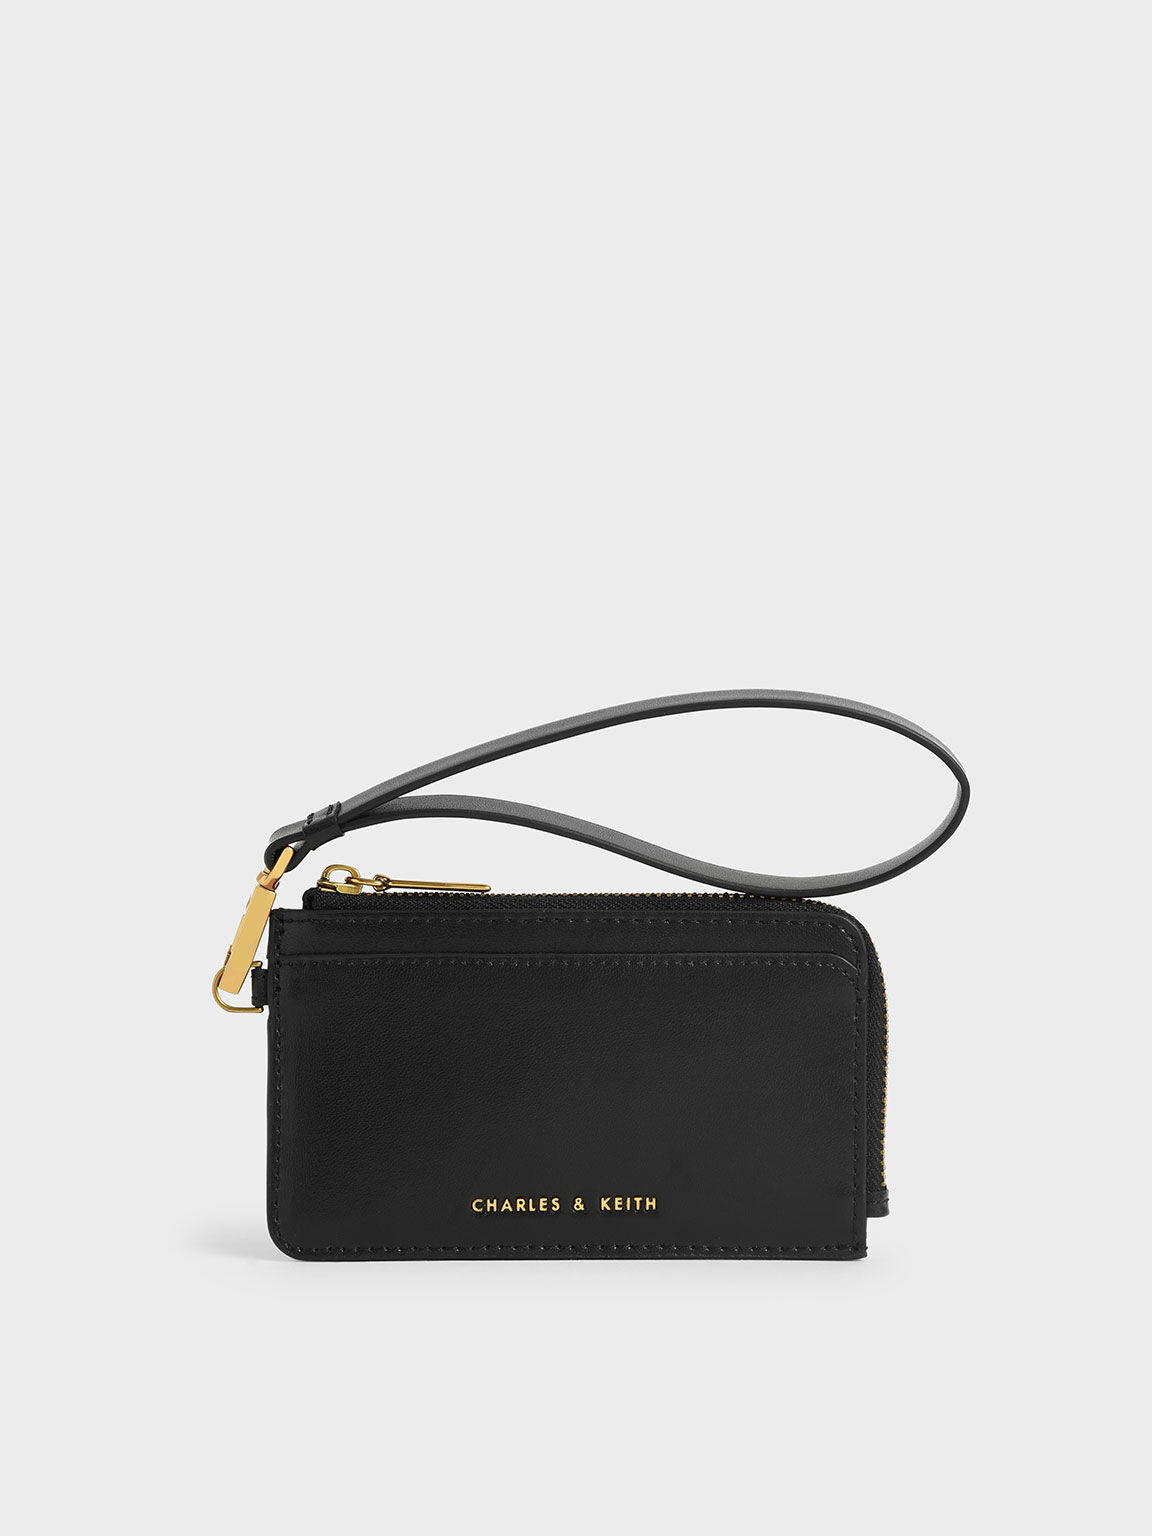 Holiday Gift Guide 2021|Ultimate Gift Ideas For Her - CHARLES & KEITH US